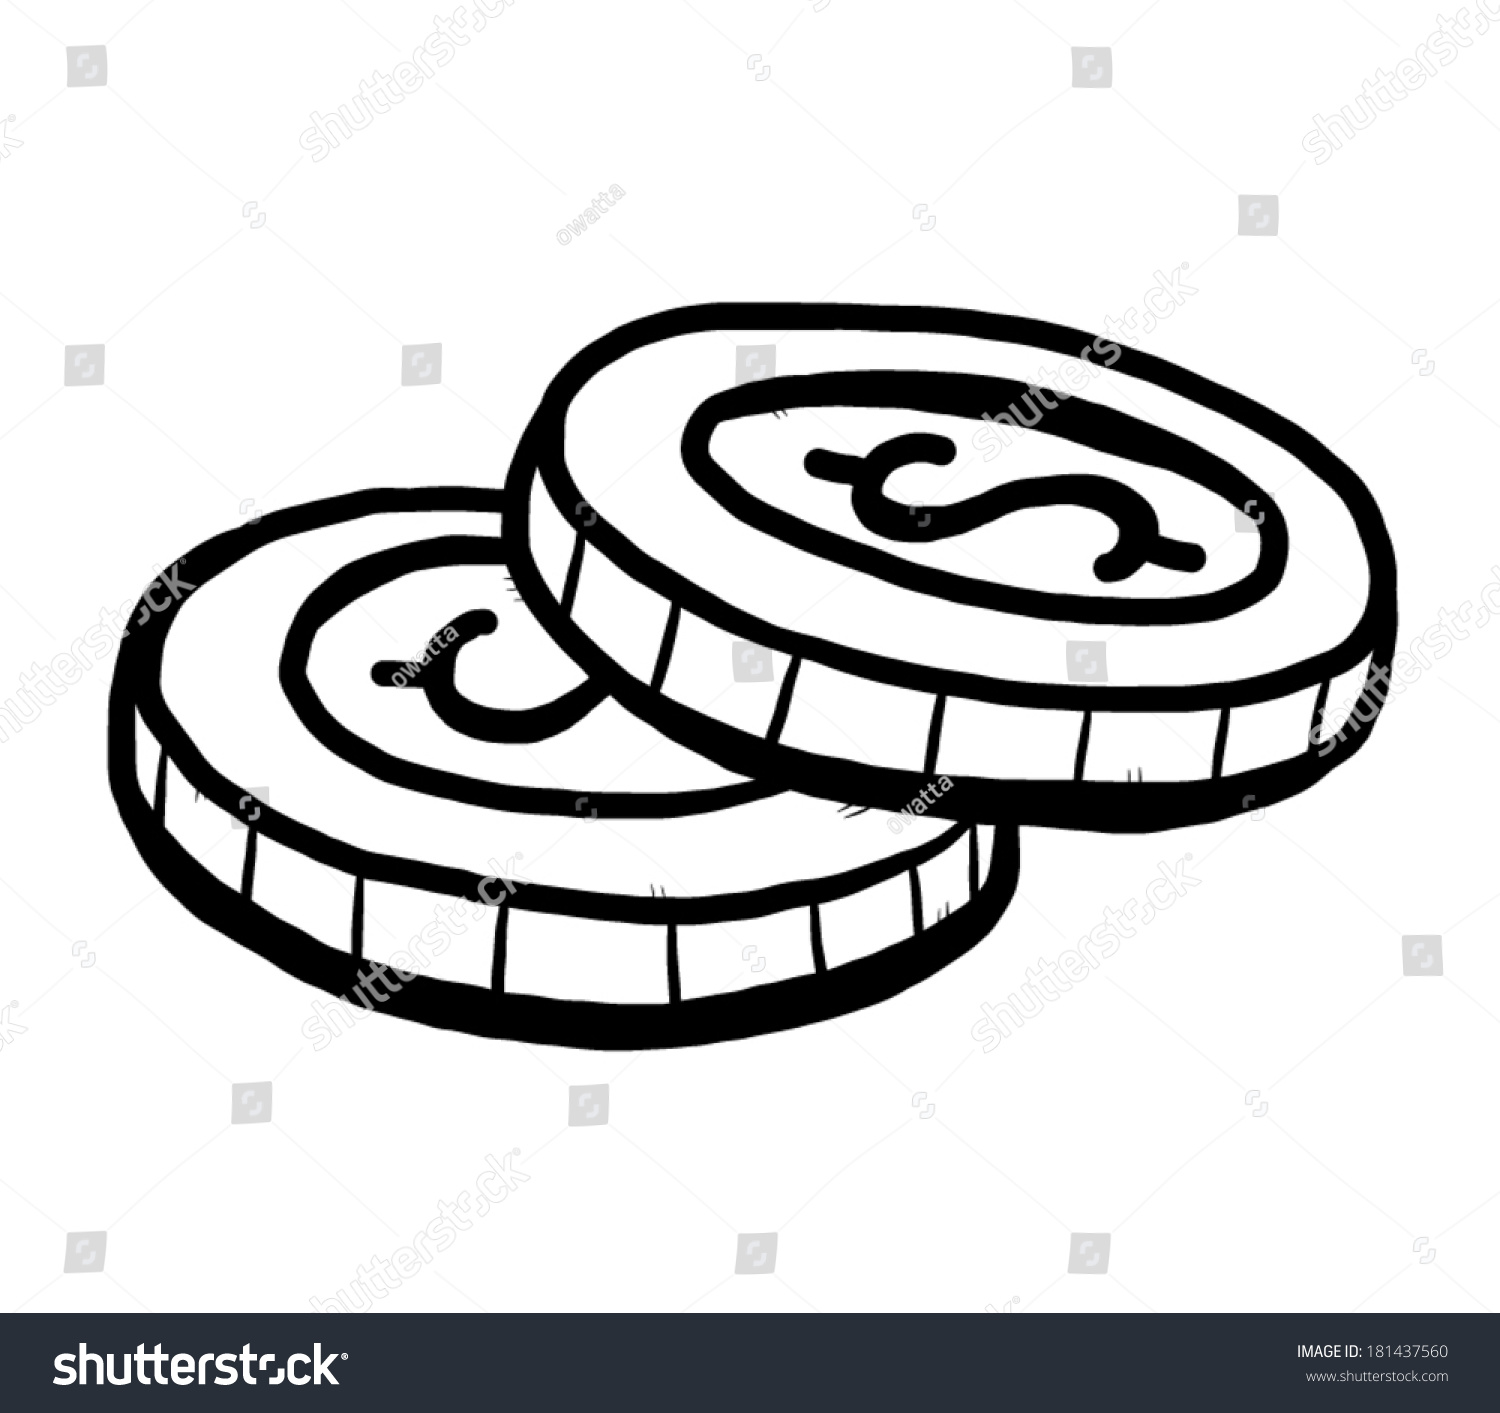 SVG of two coins / cartoon vector and illustration, black and white, hand drawn style, black and white image, isolated on white background. svg